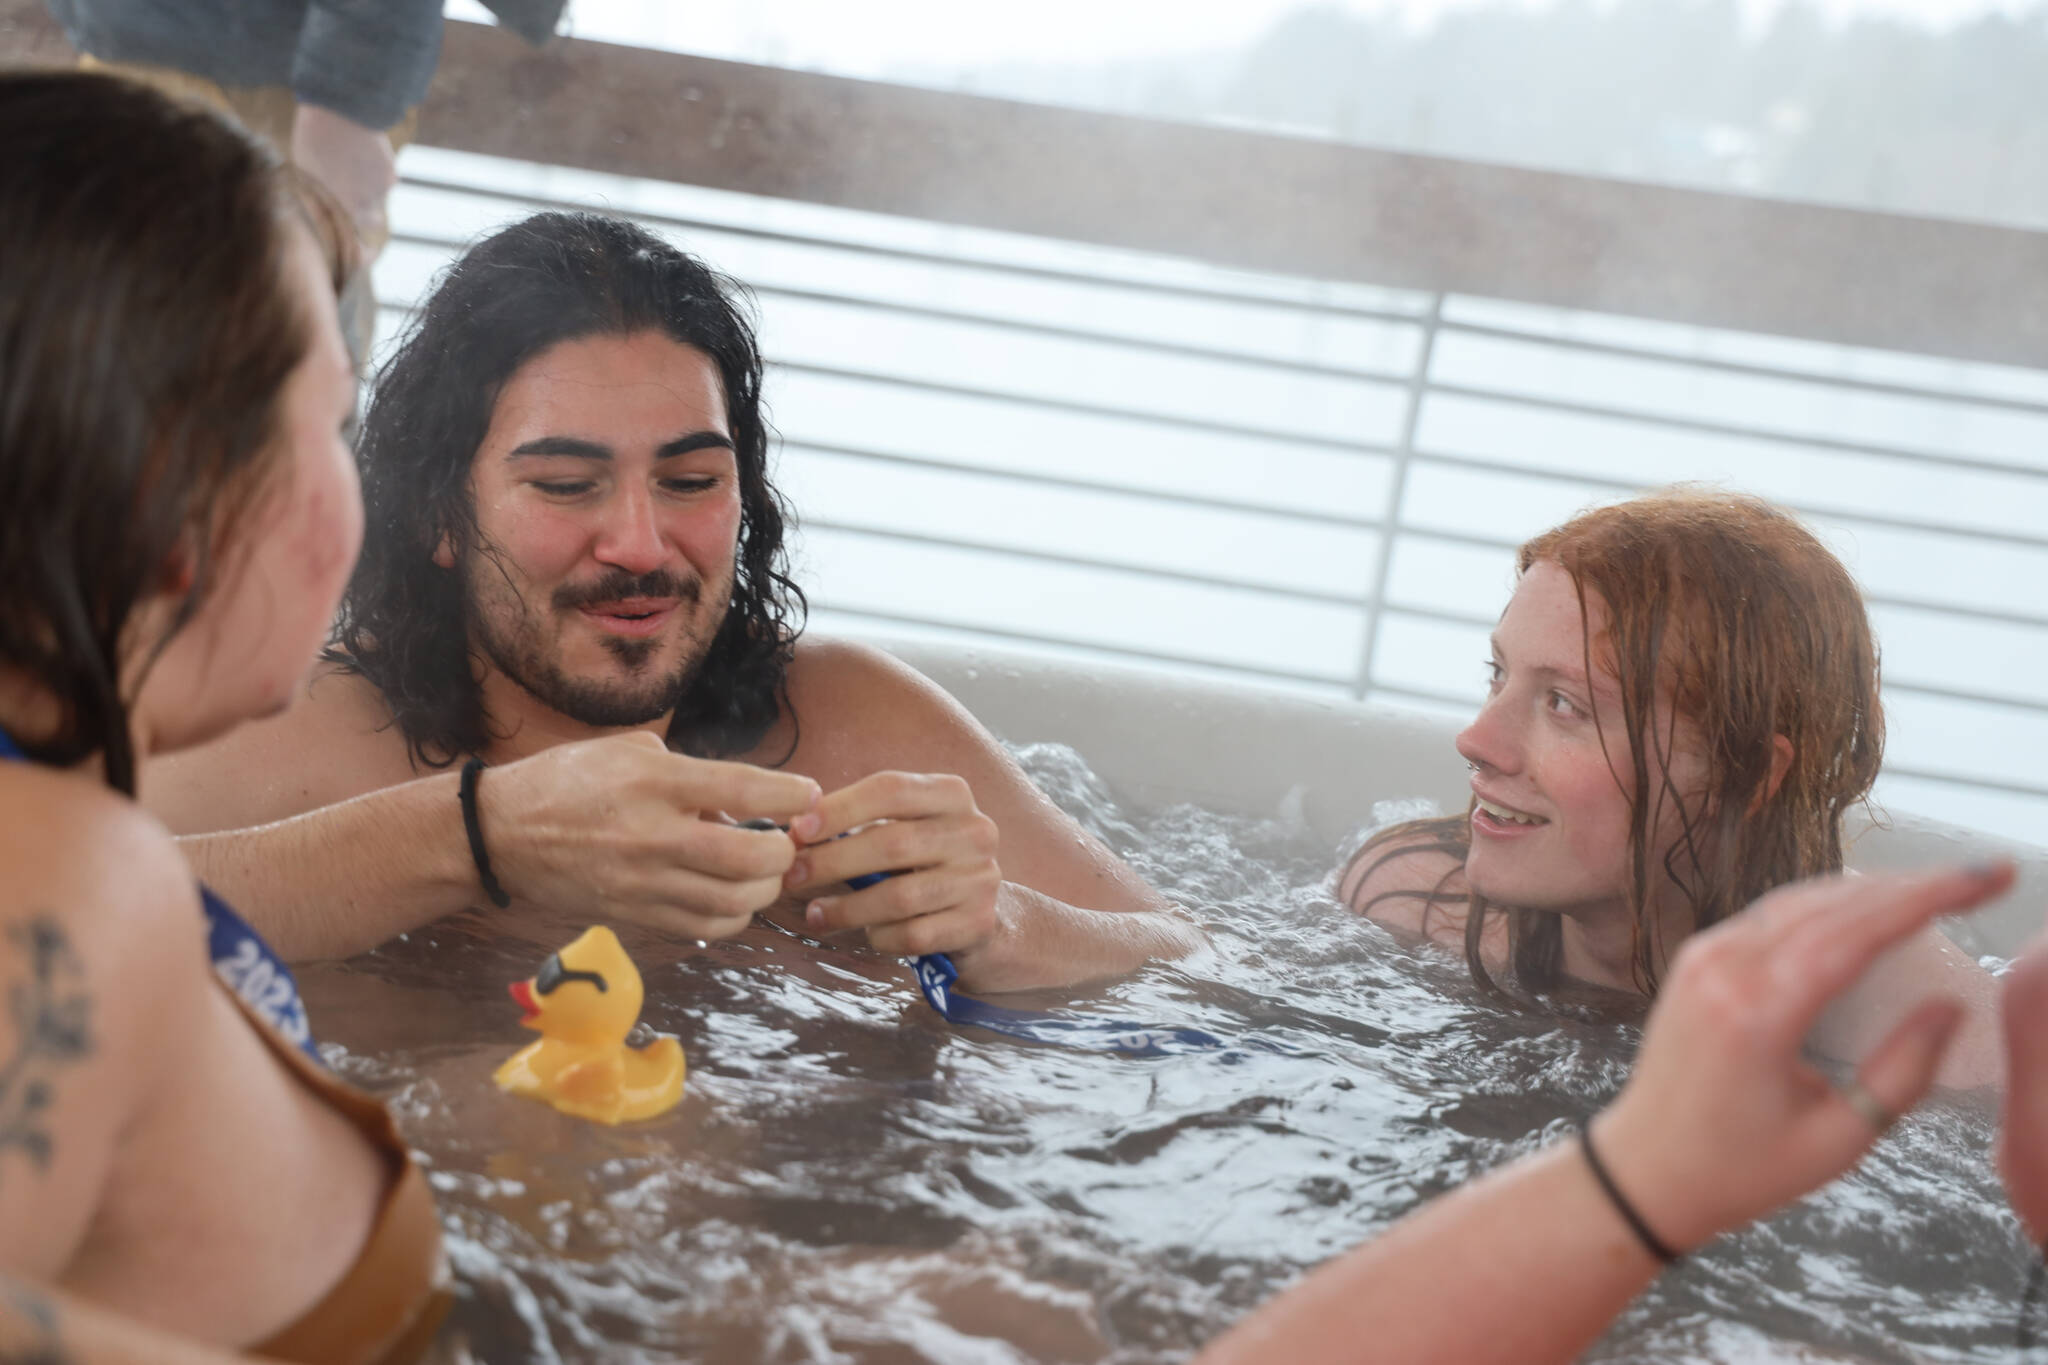 University of Alaska Southeast students relax in a hot tub after jumping into the waters of Auke Bay on Saturday afternoon for the 25th UAS Polar Plunge. (Clarise Larson / Juneau Empire)